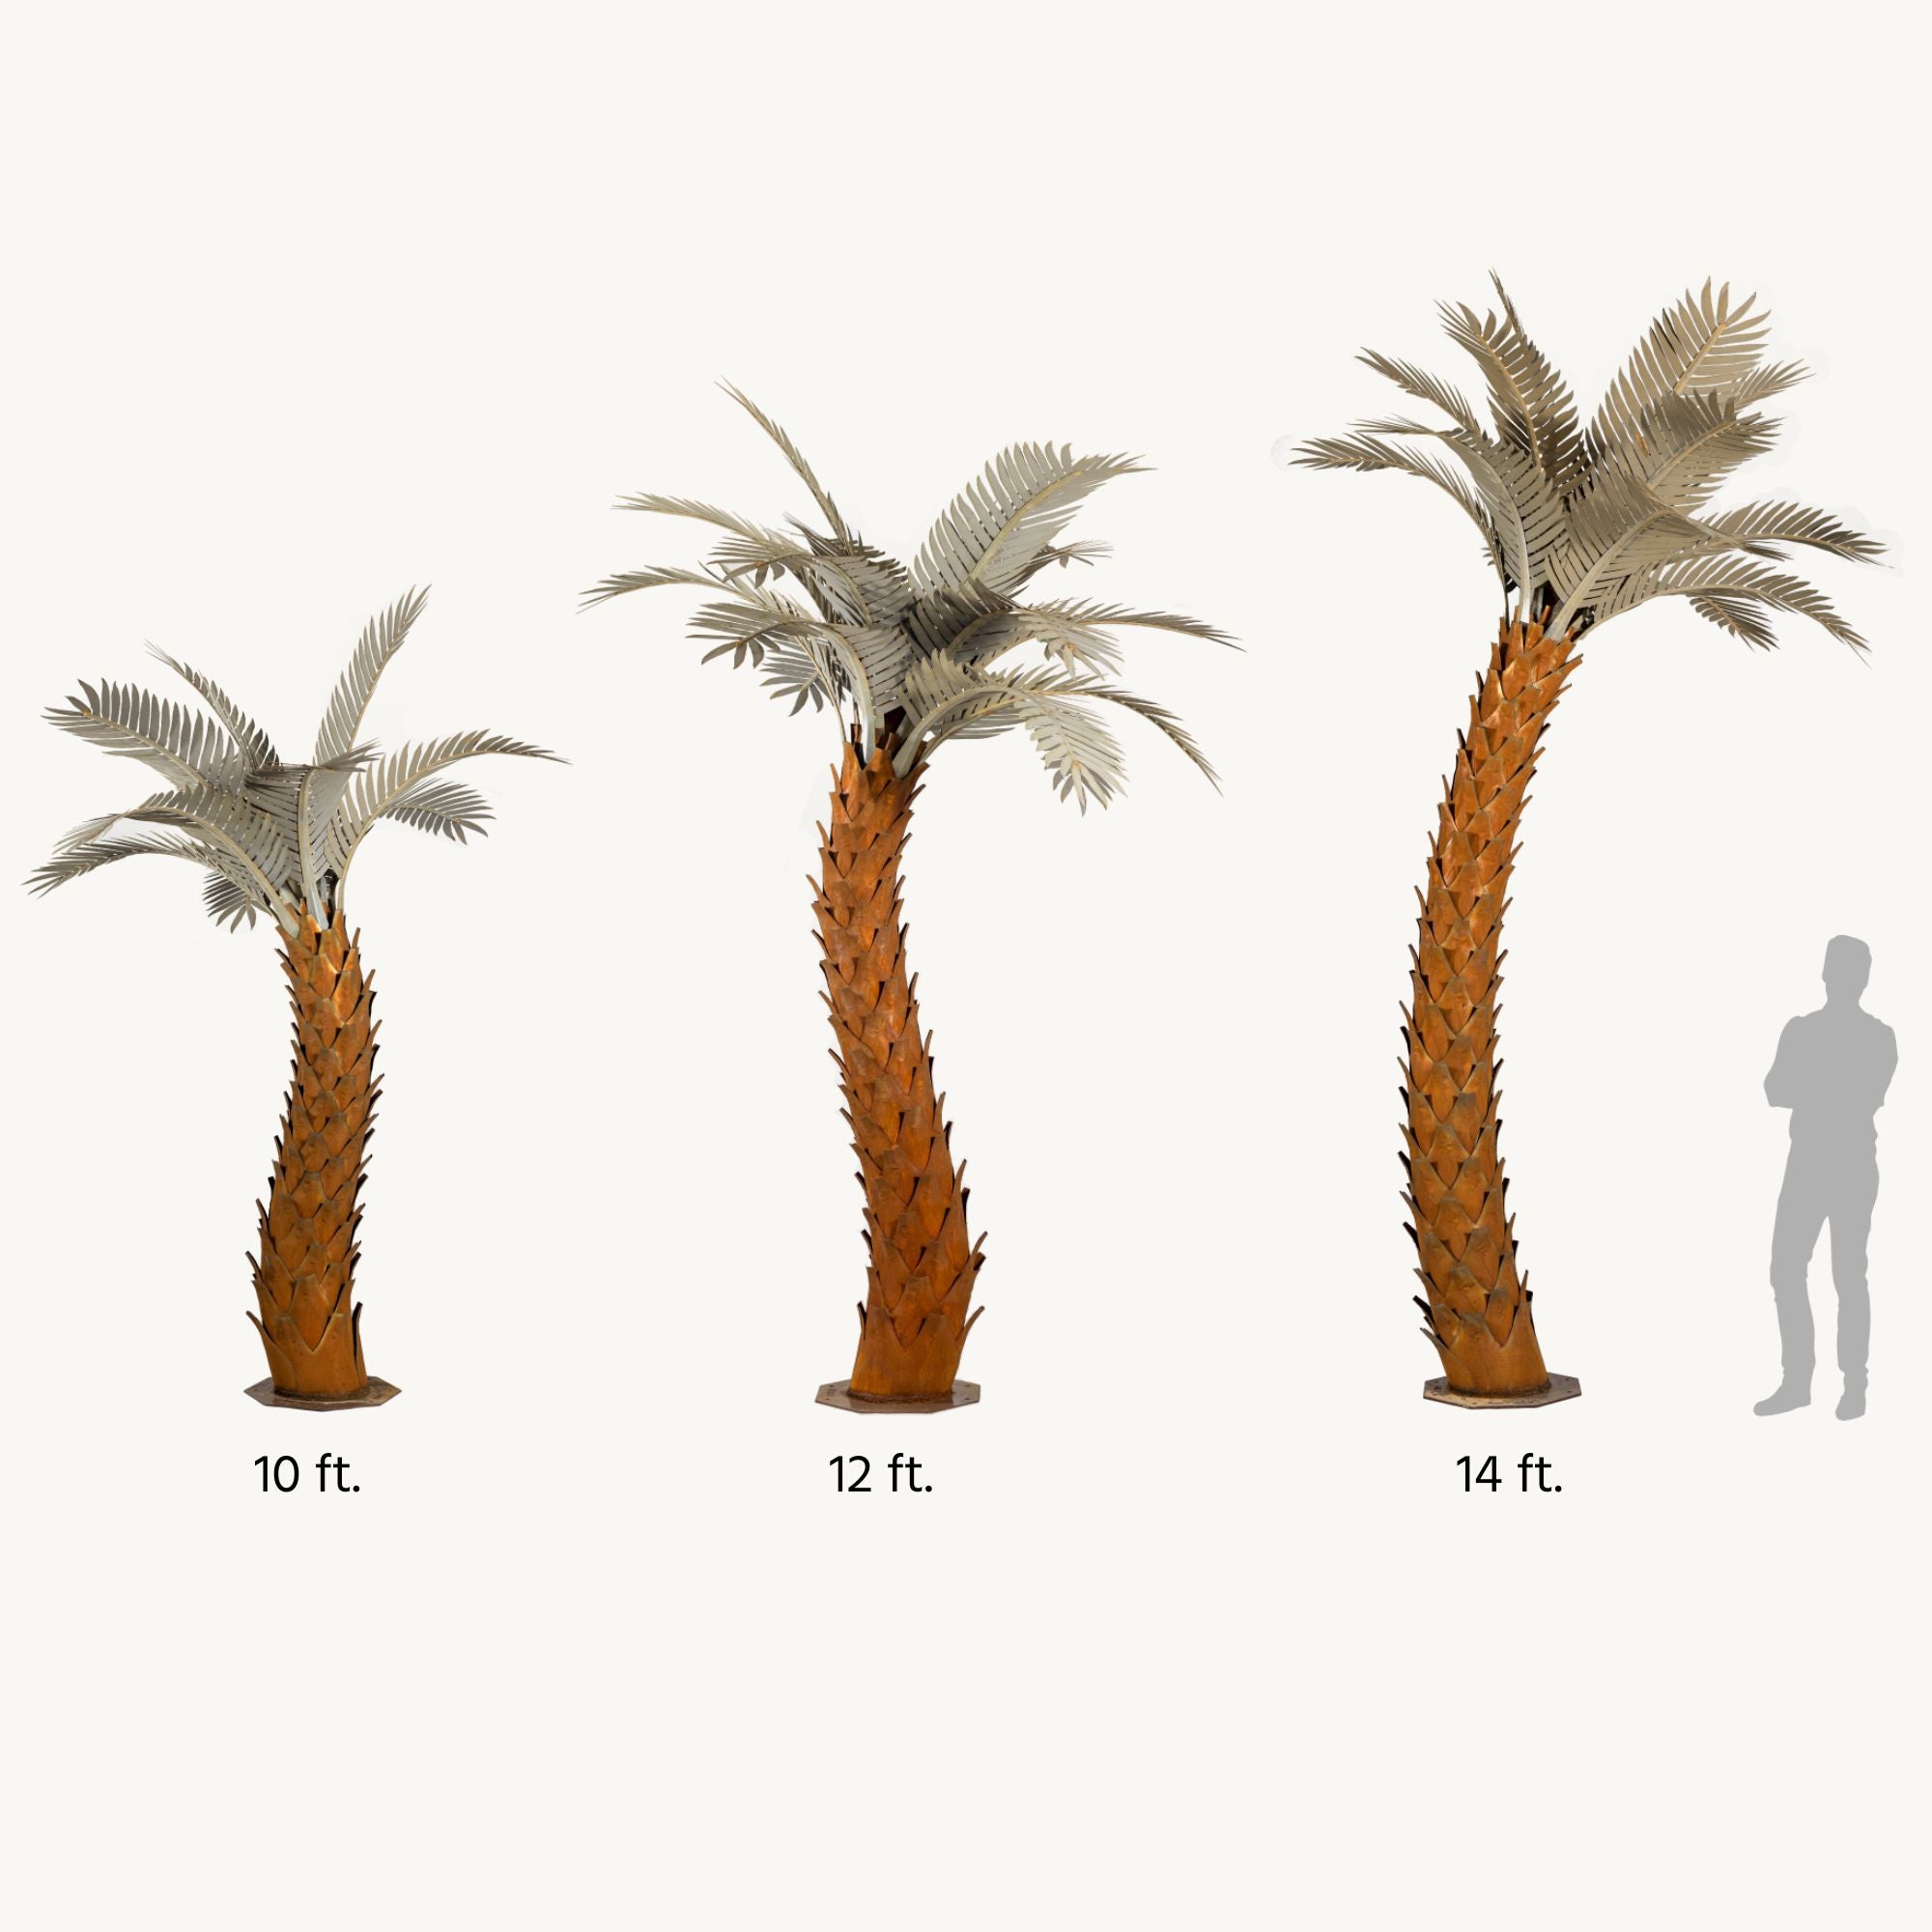 A size guide displaying the scale difference between 10ft, 12ft, and 14ft metal sunset palm trees. The sculpture's intricate design features realistic palm fronds and textured trunk, creating a lifelike appearance.